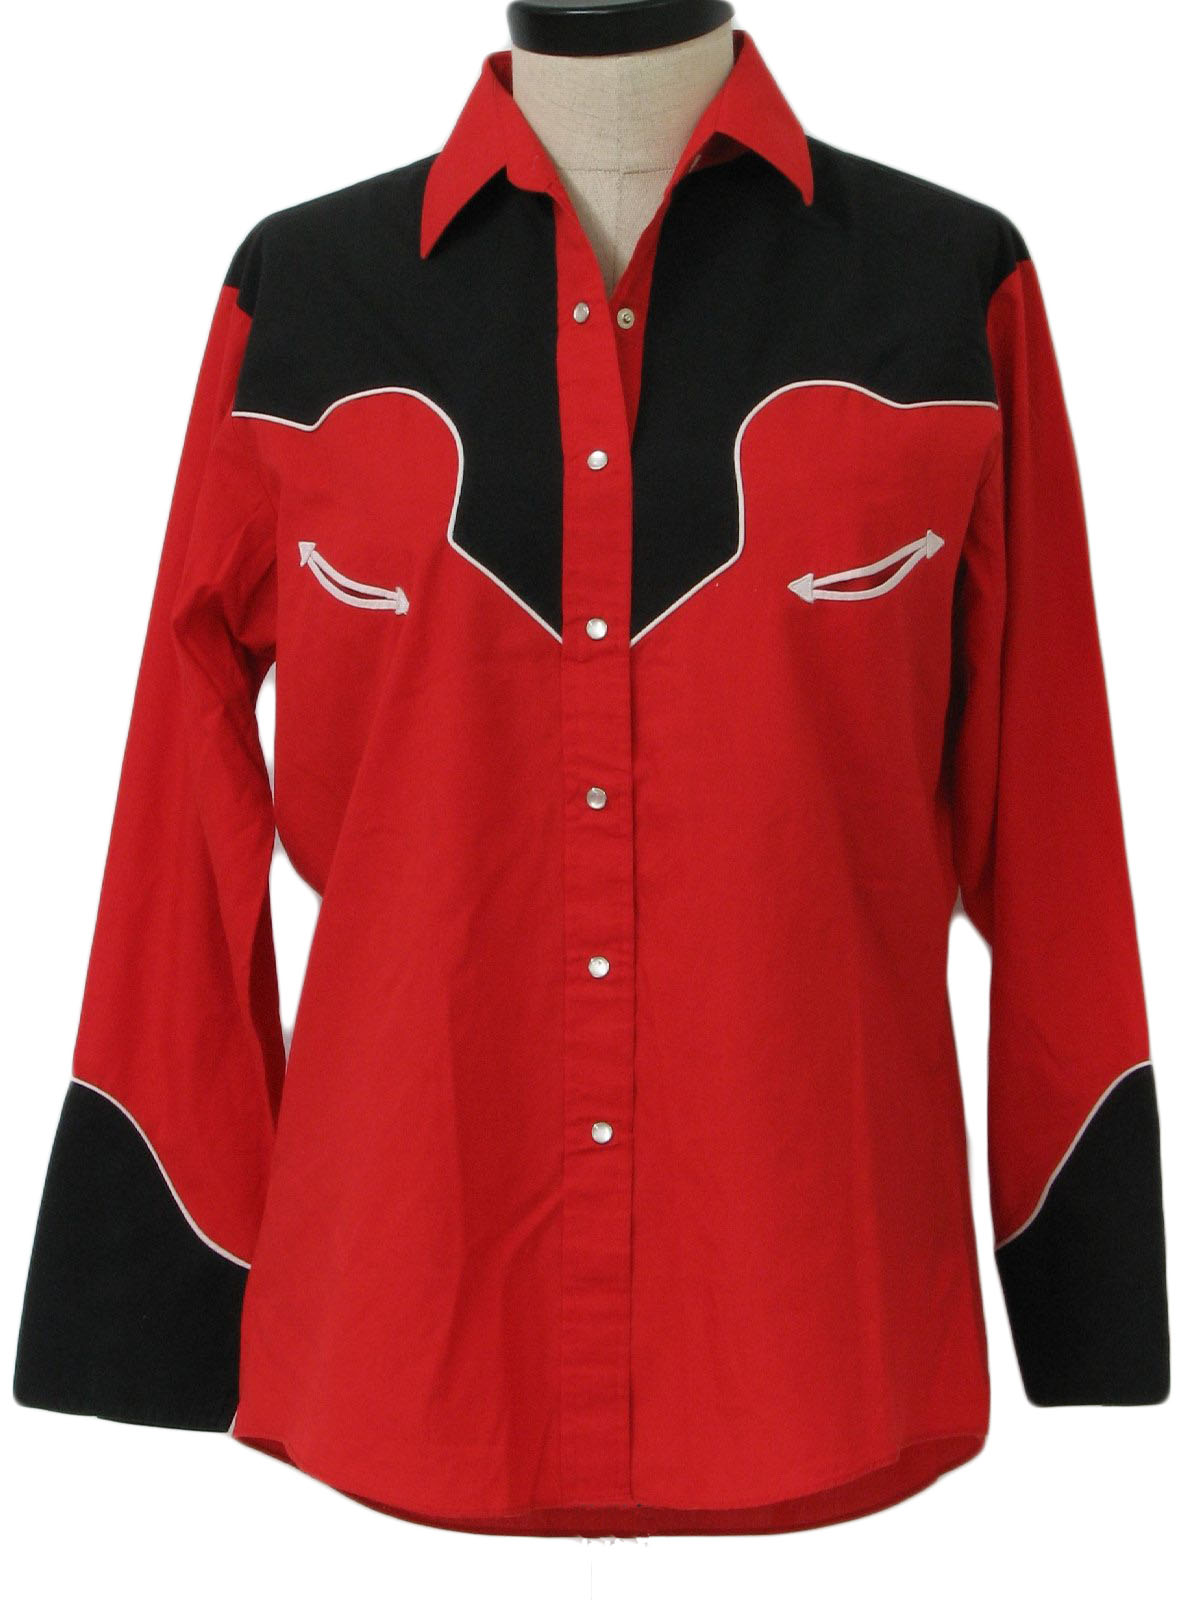 1980's Retro Western Shirt: 80s -Ely Country Charmers- Womens red and ...